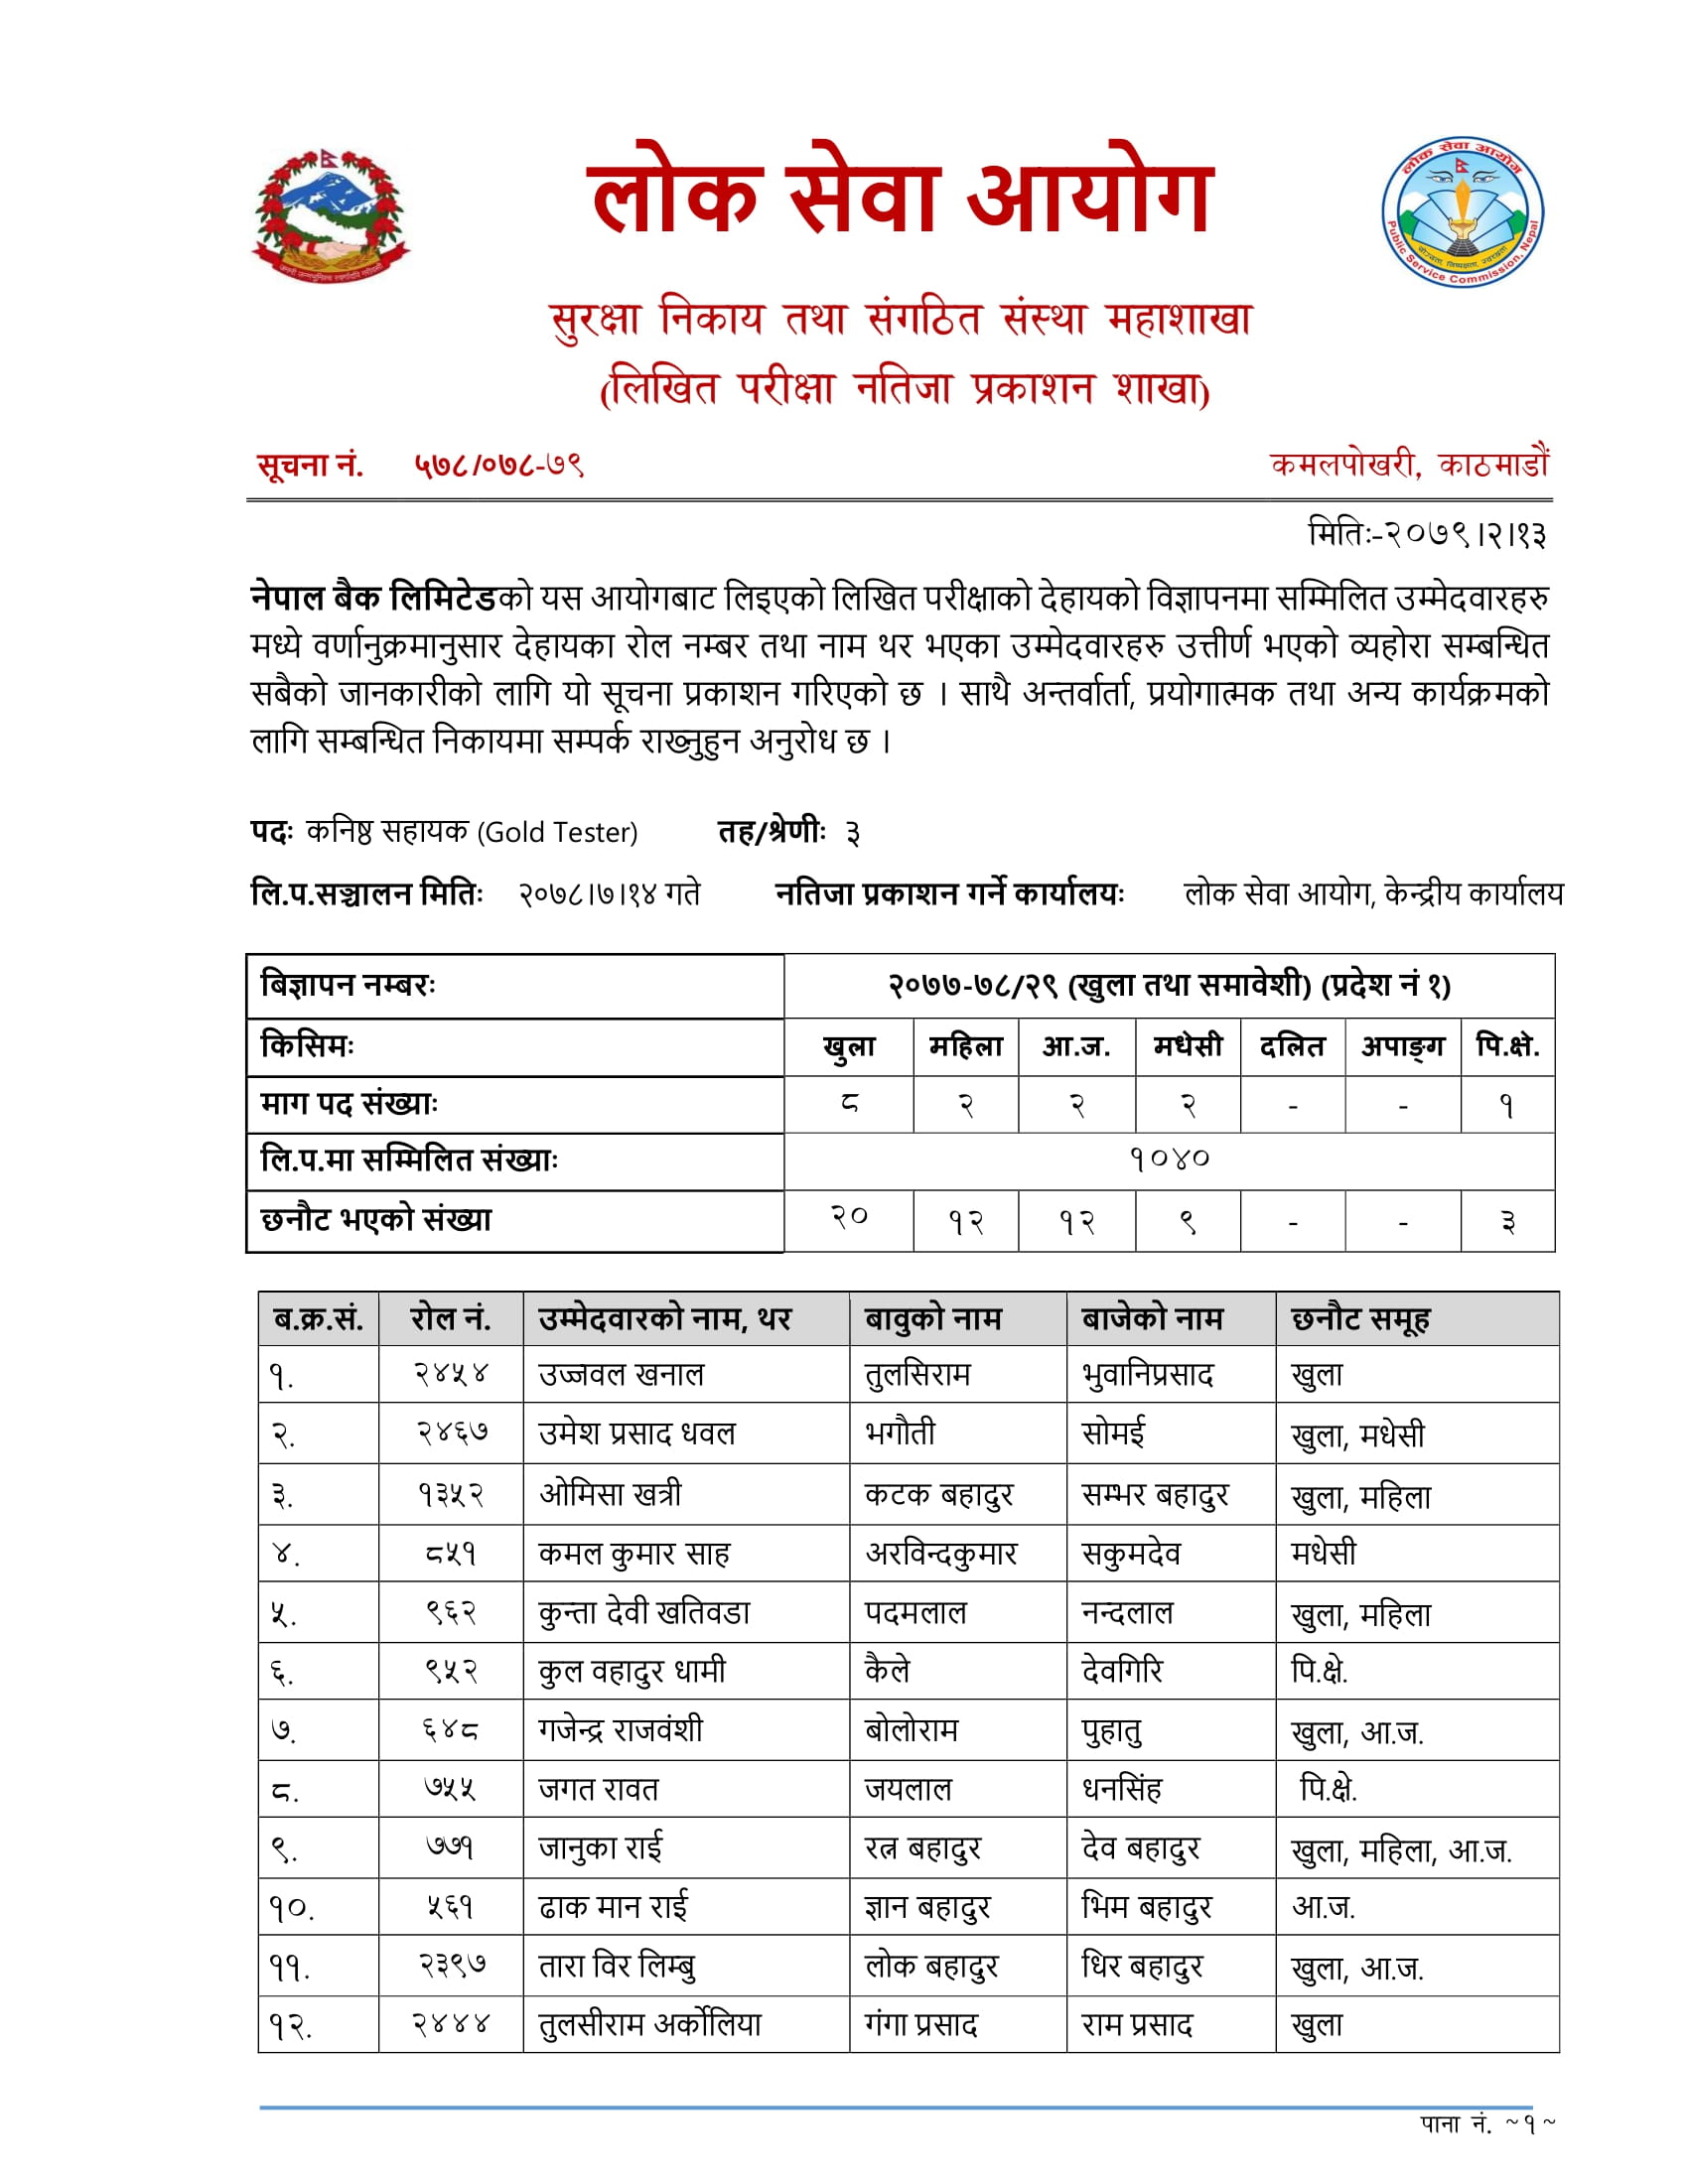 Nepal Bank Limited Written Exam Result